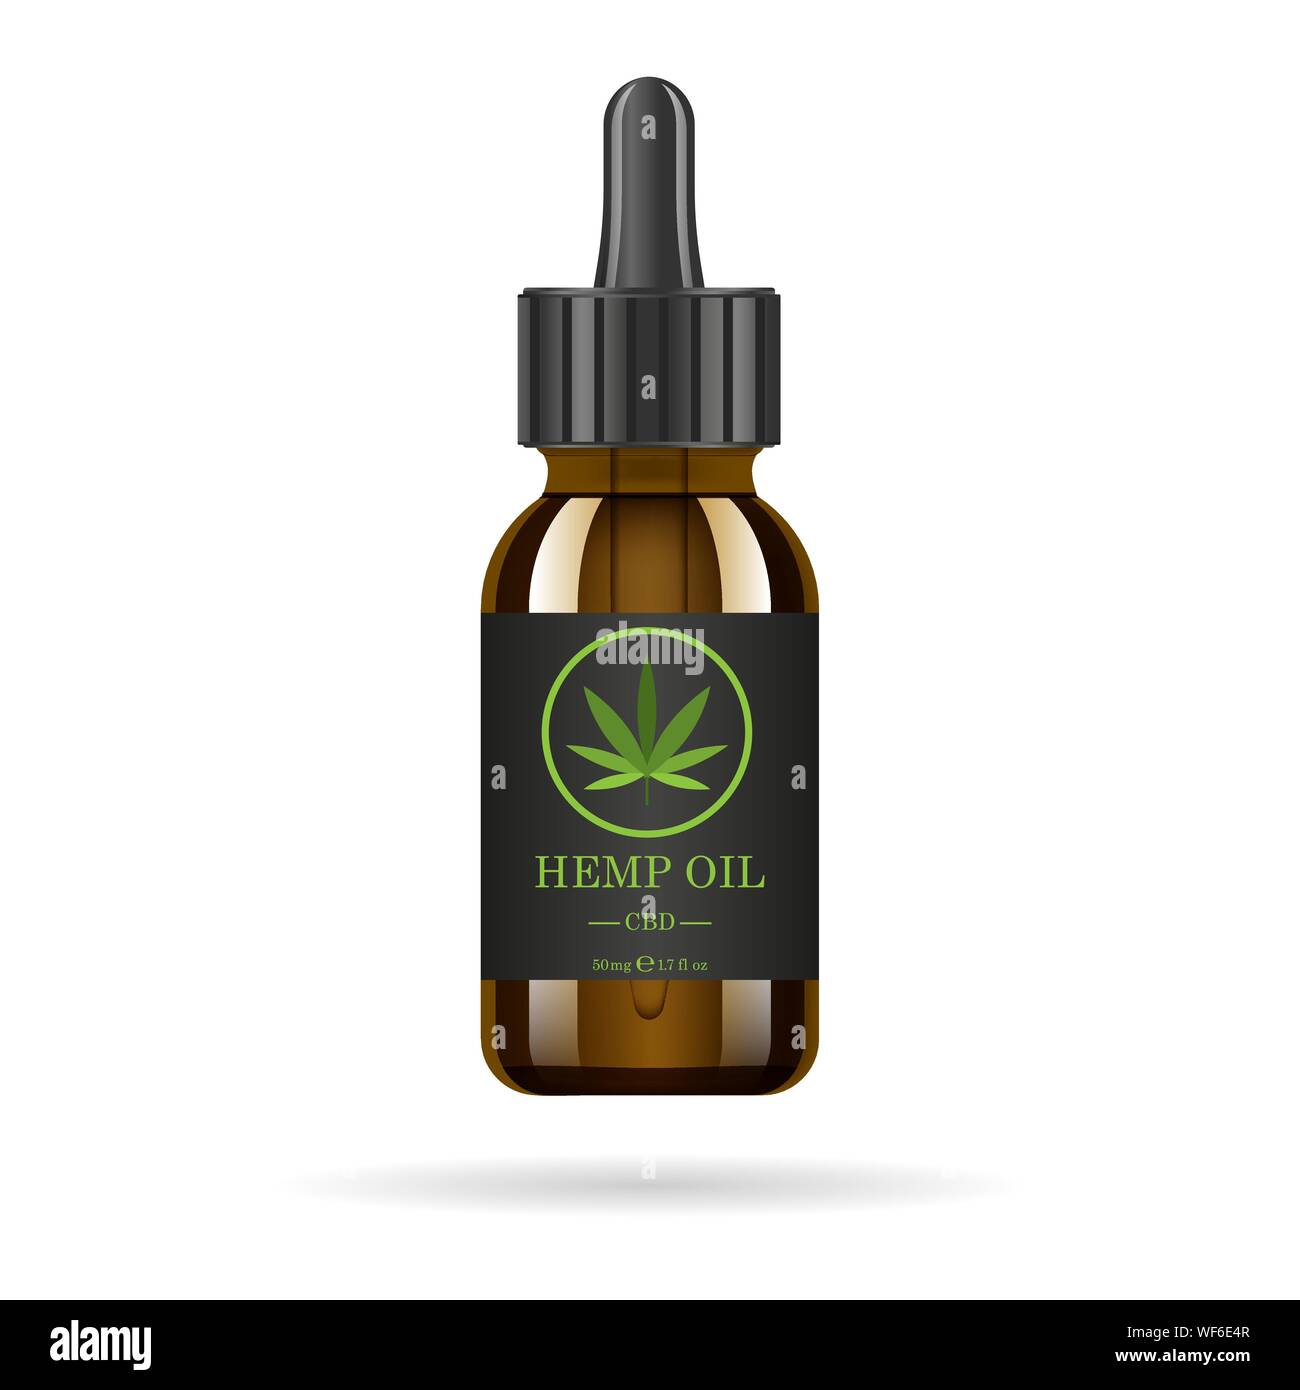 Download Realistic Brown Glass Bottle With Hemp Oil Mock Up Of Cannabis Oil Extracts In Jars Medical Marijuana Logo On The Label Vector Illustration Stock Vector Image Art Alamy